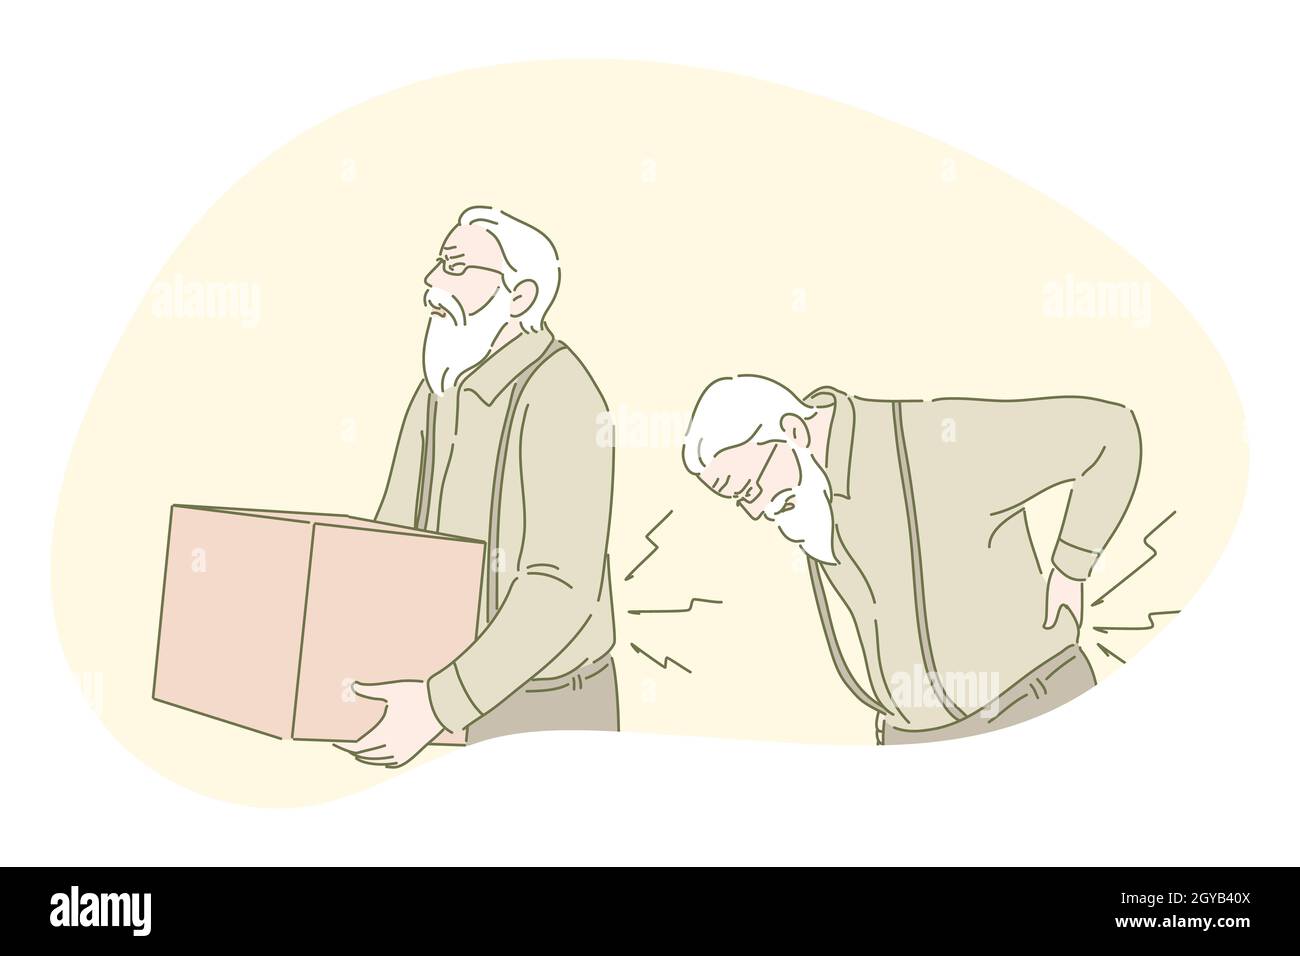 Back ache, back pain, rheumatism, osteoporosis concept. Senior mature man cartoon character carrying heavy box and suffering from strong back pain. He Stock Photo